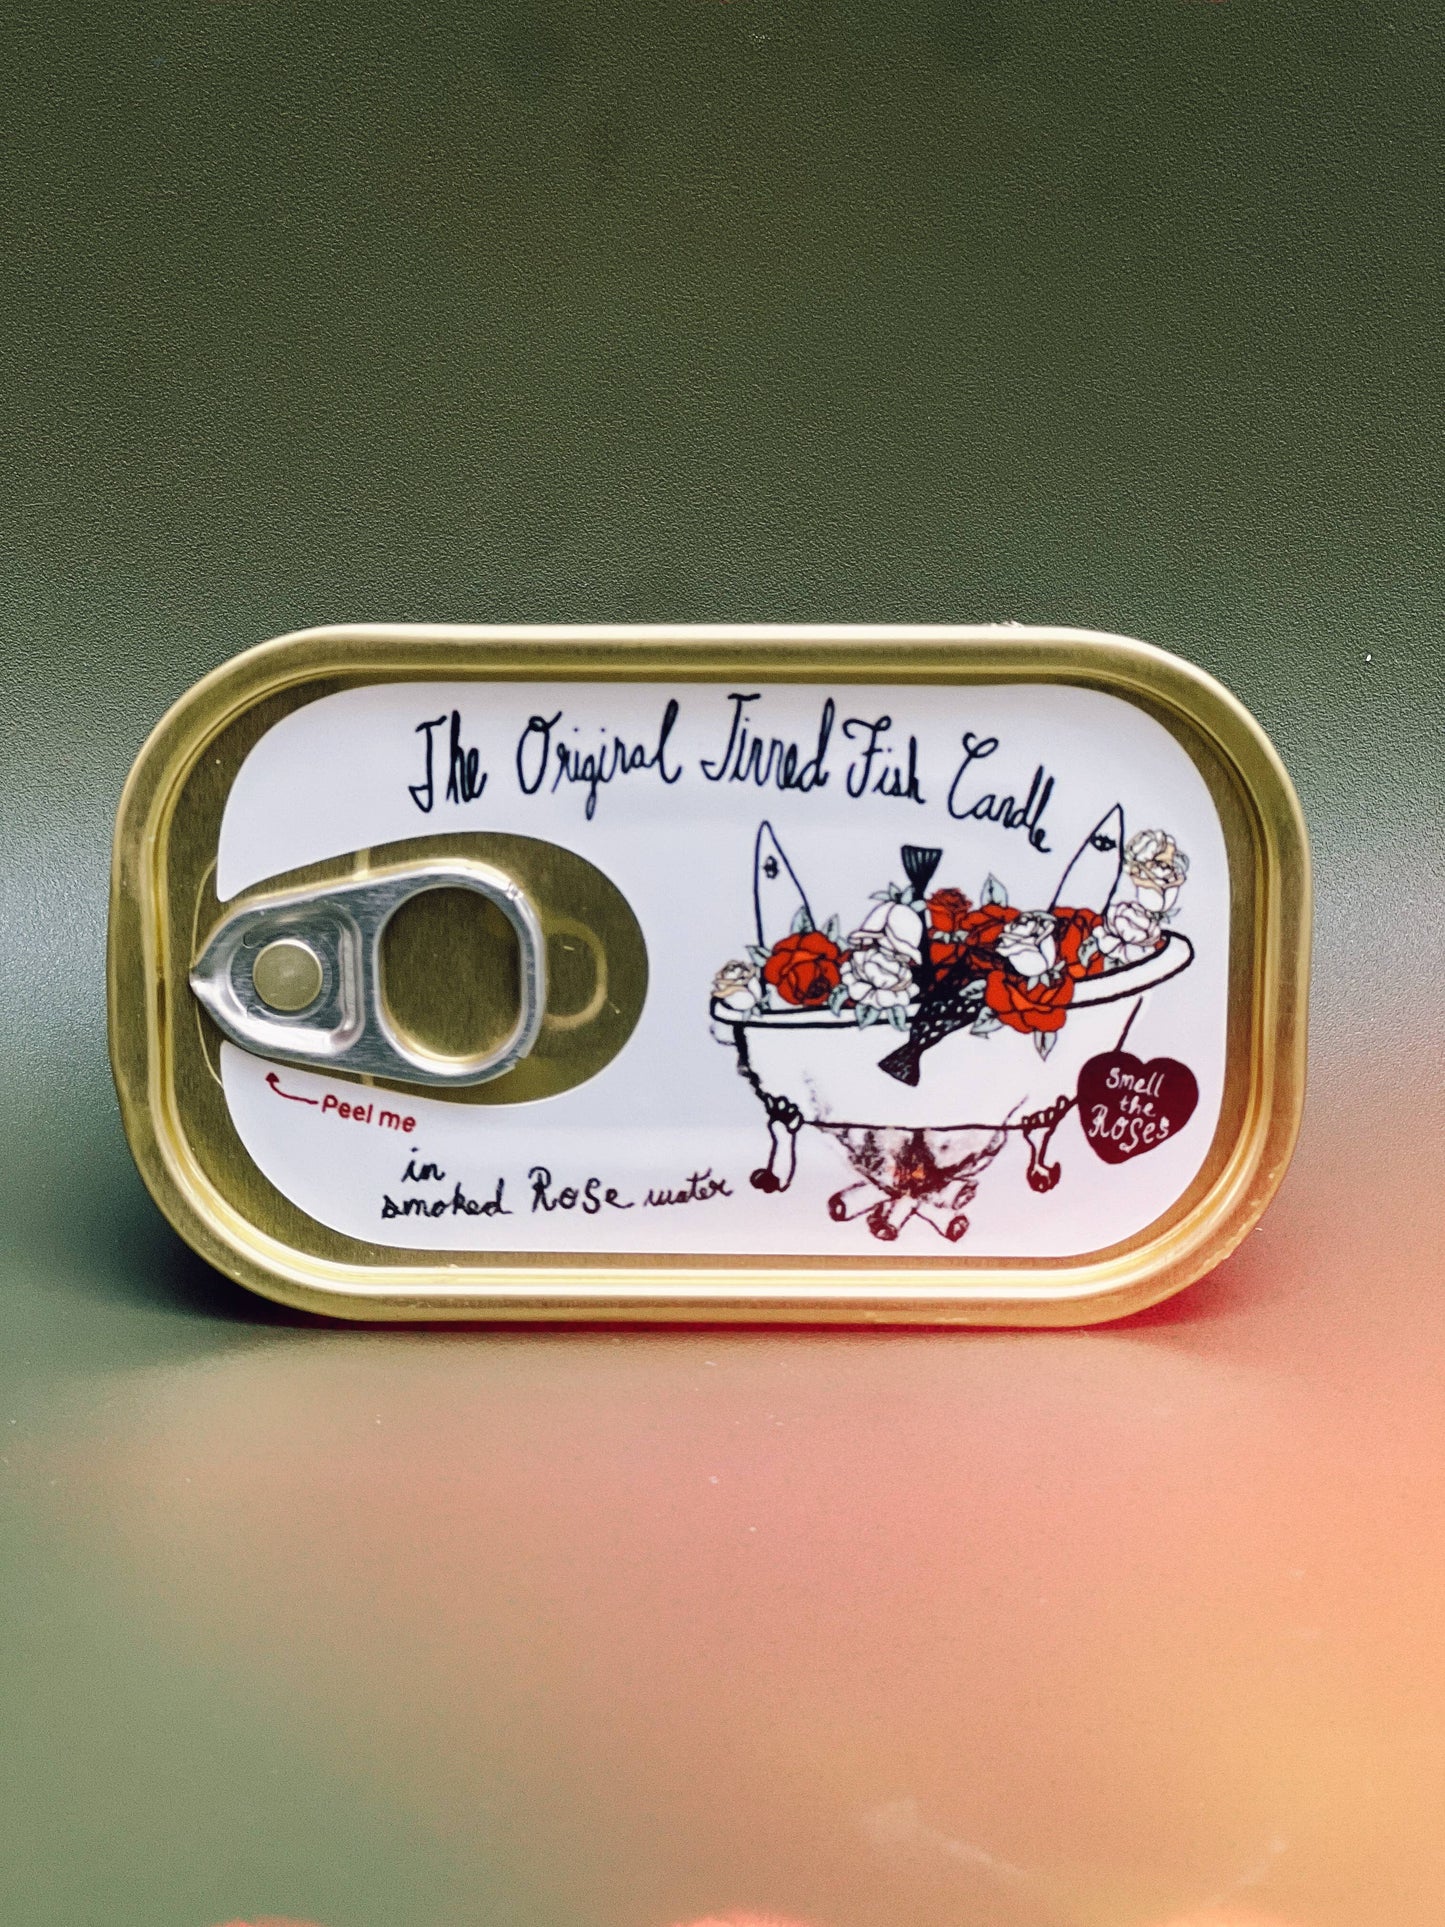 Smoked Rose Water Tinned Fish Candle